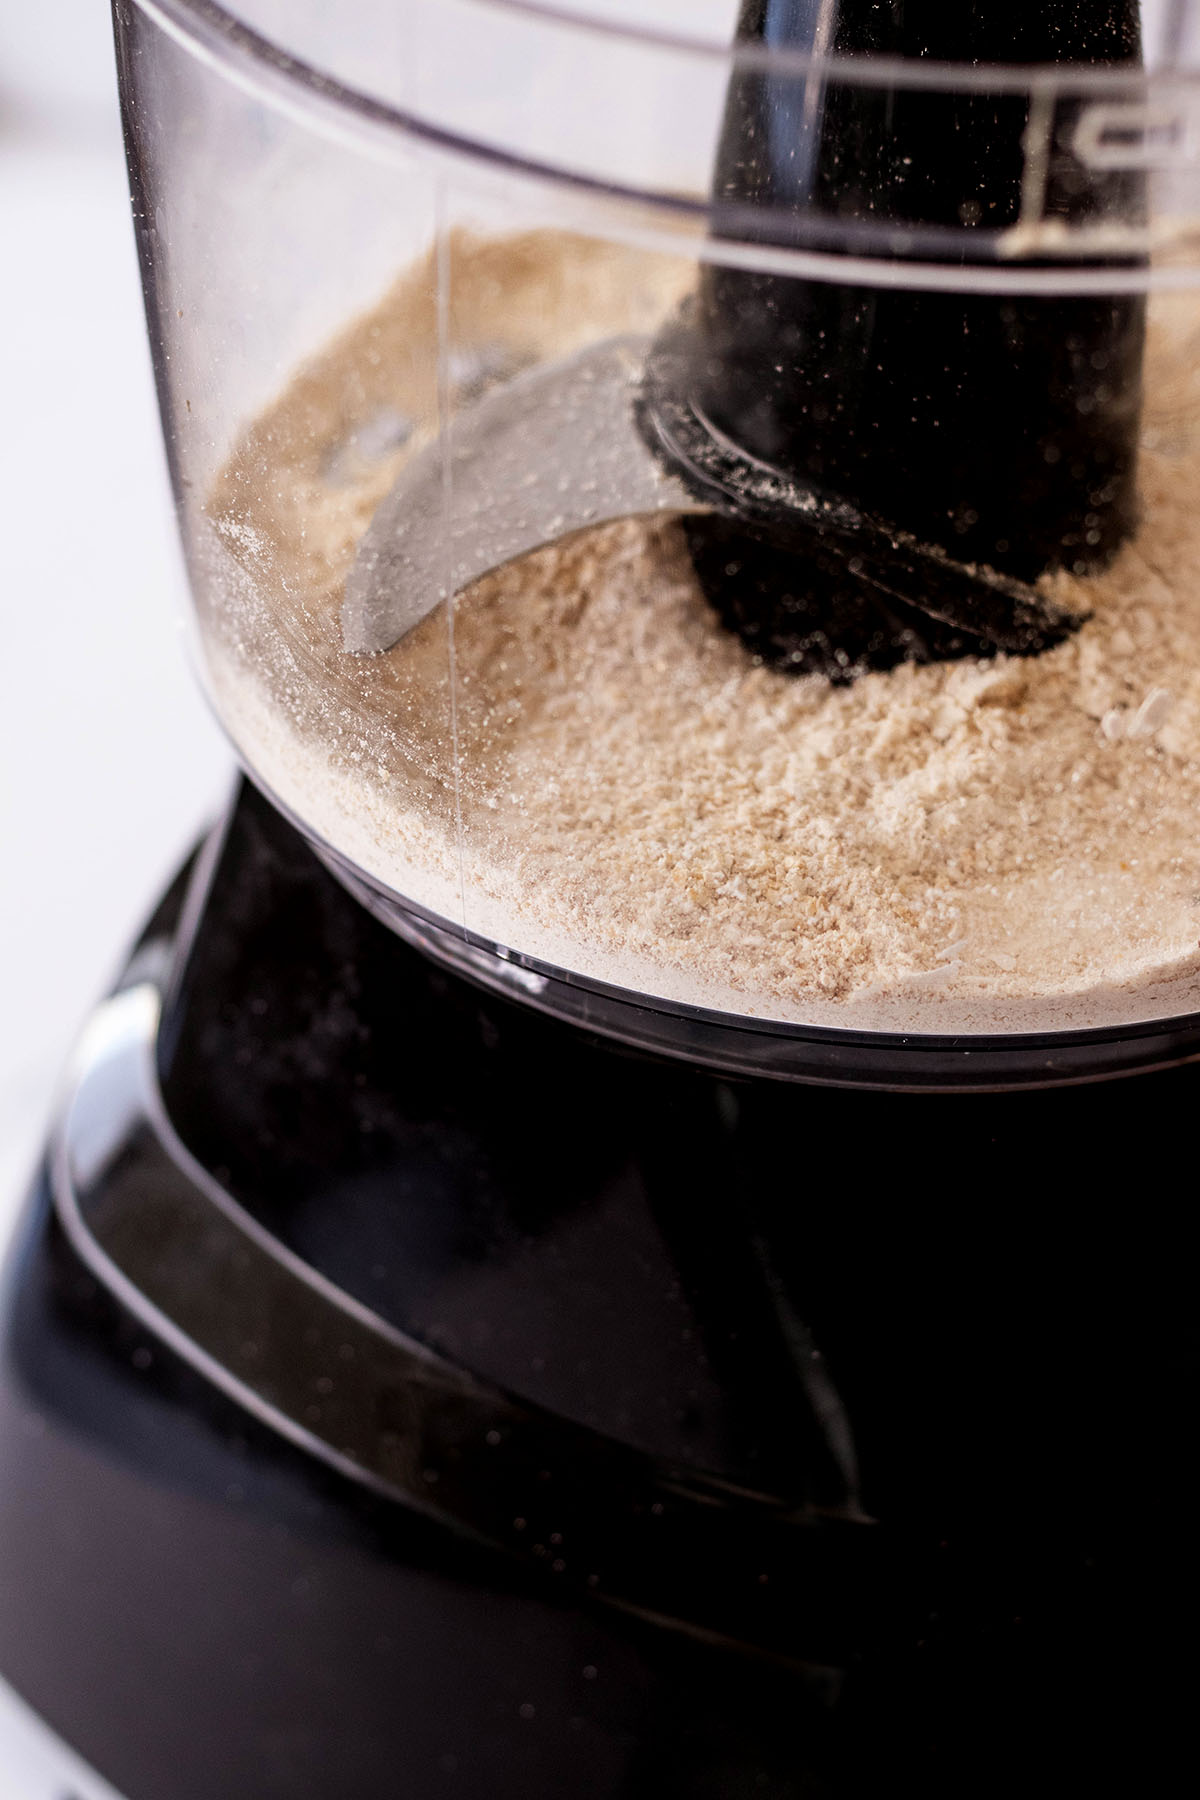 Ground oats in a food processor